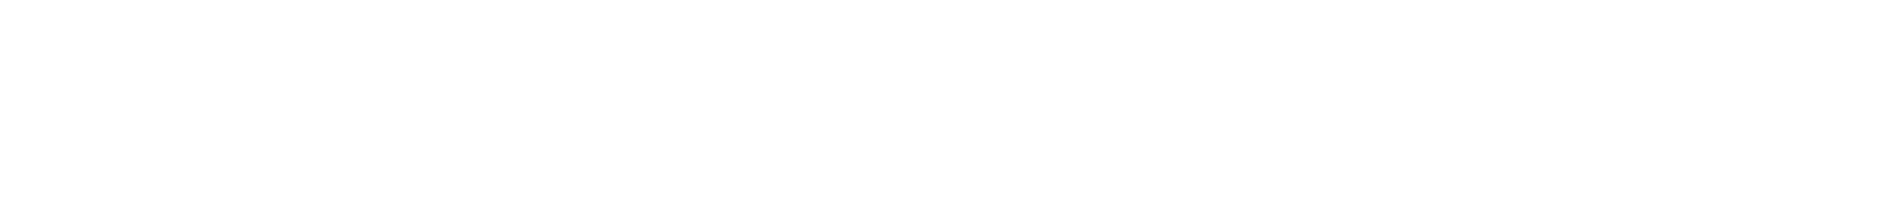 Review of Business Activities